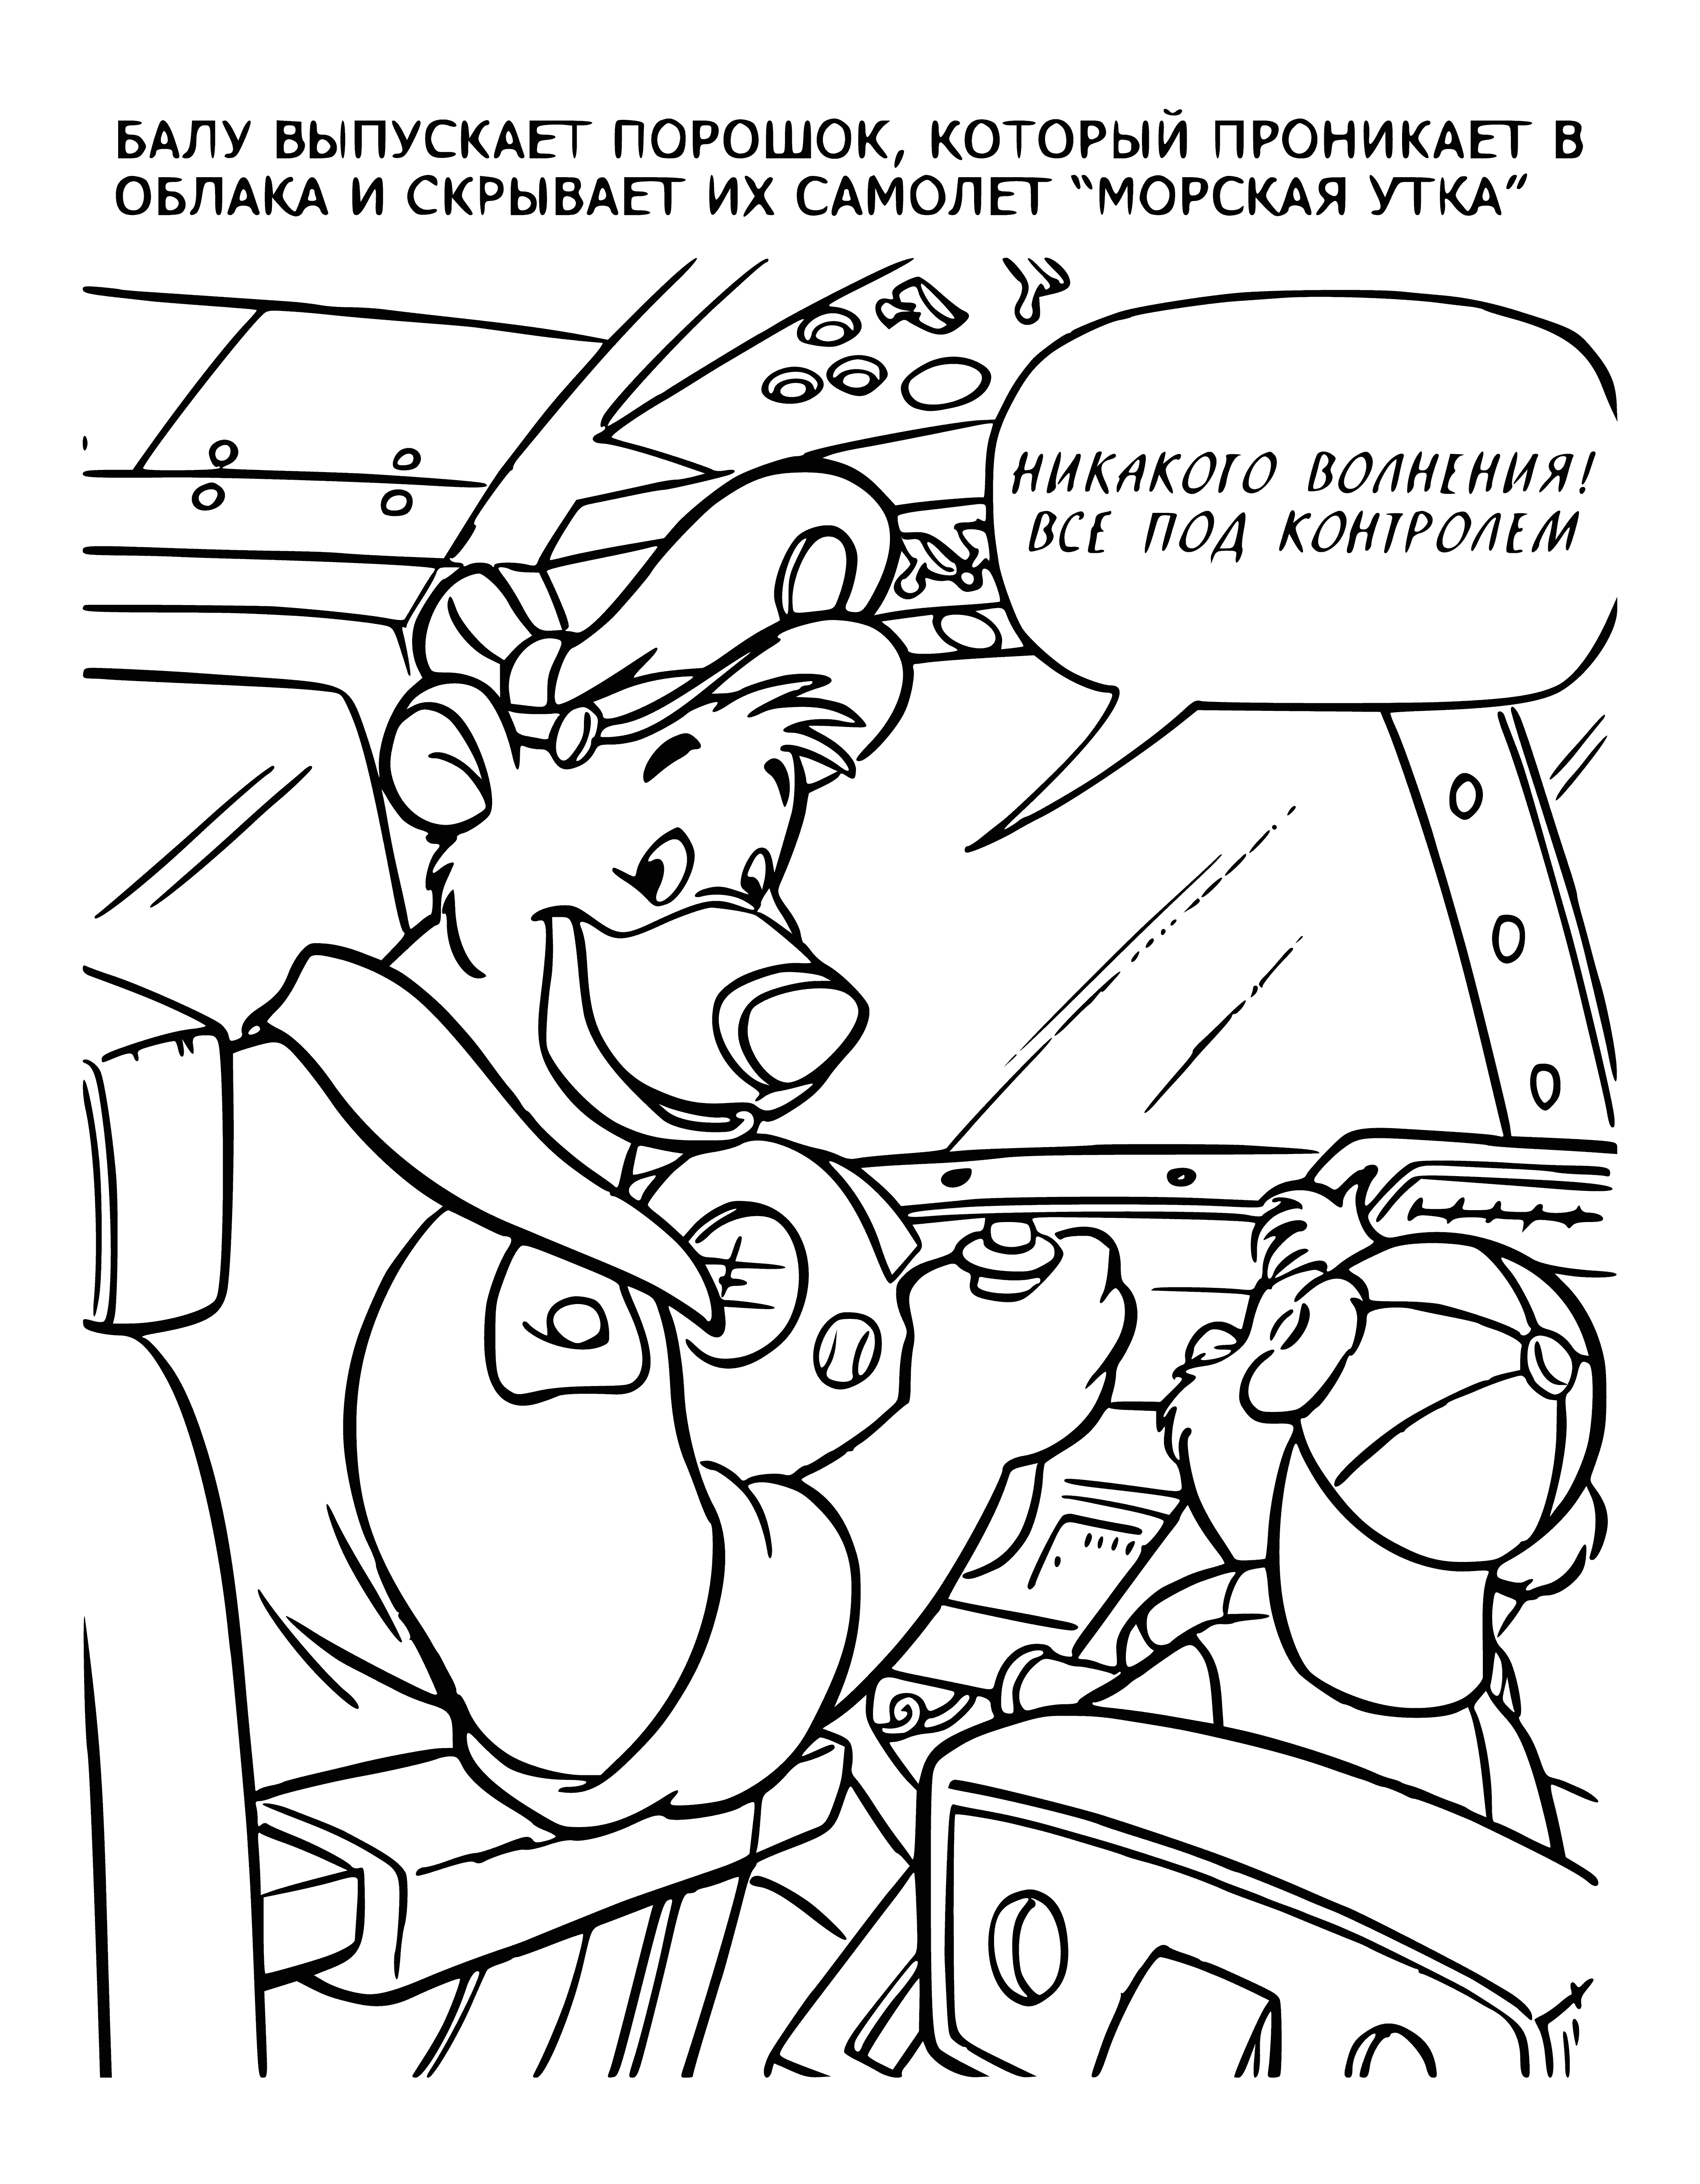 coloring page: Baloo hung lights and got a present for Mowgli - they're ready to celebrate!